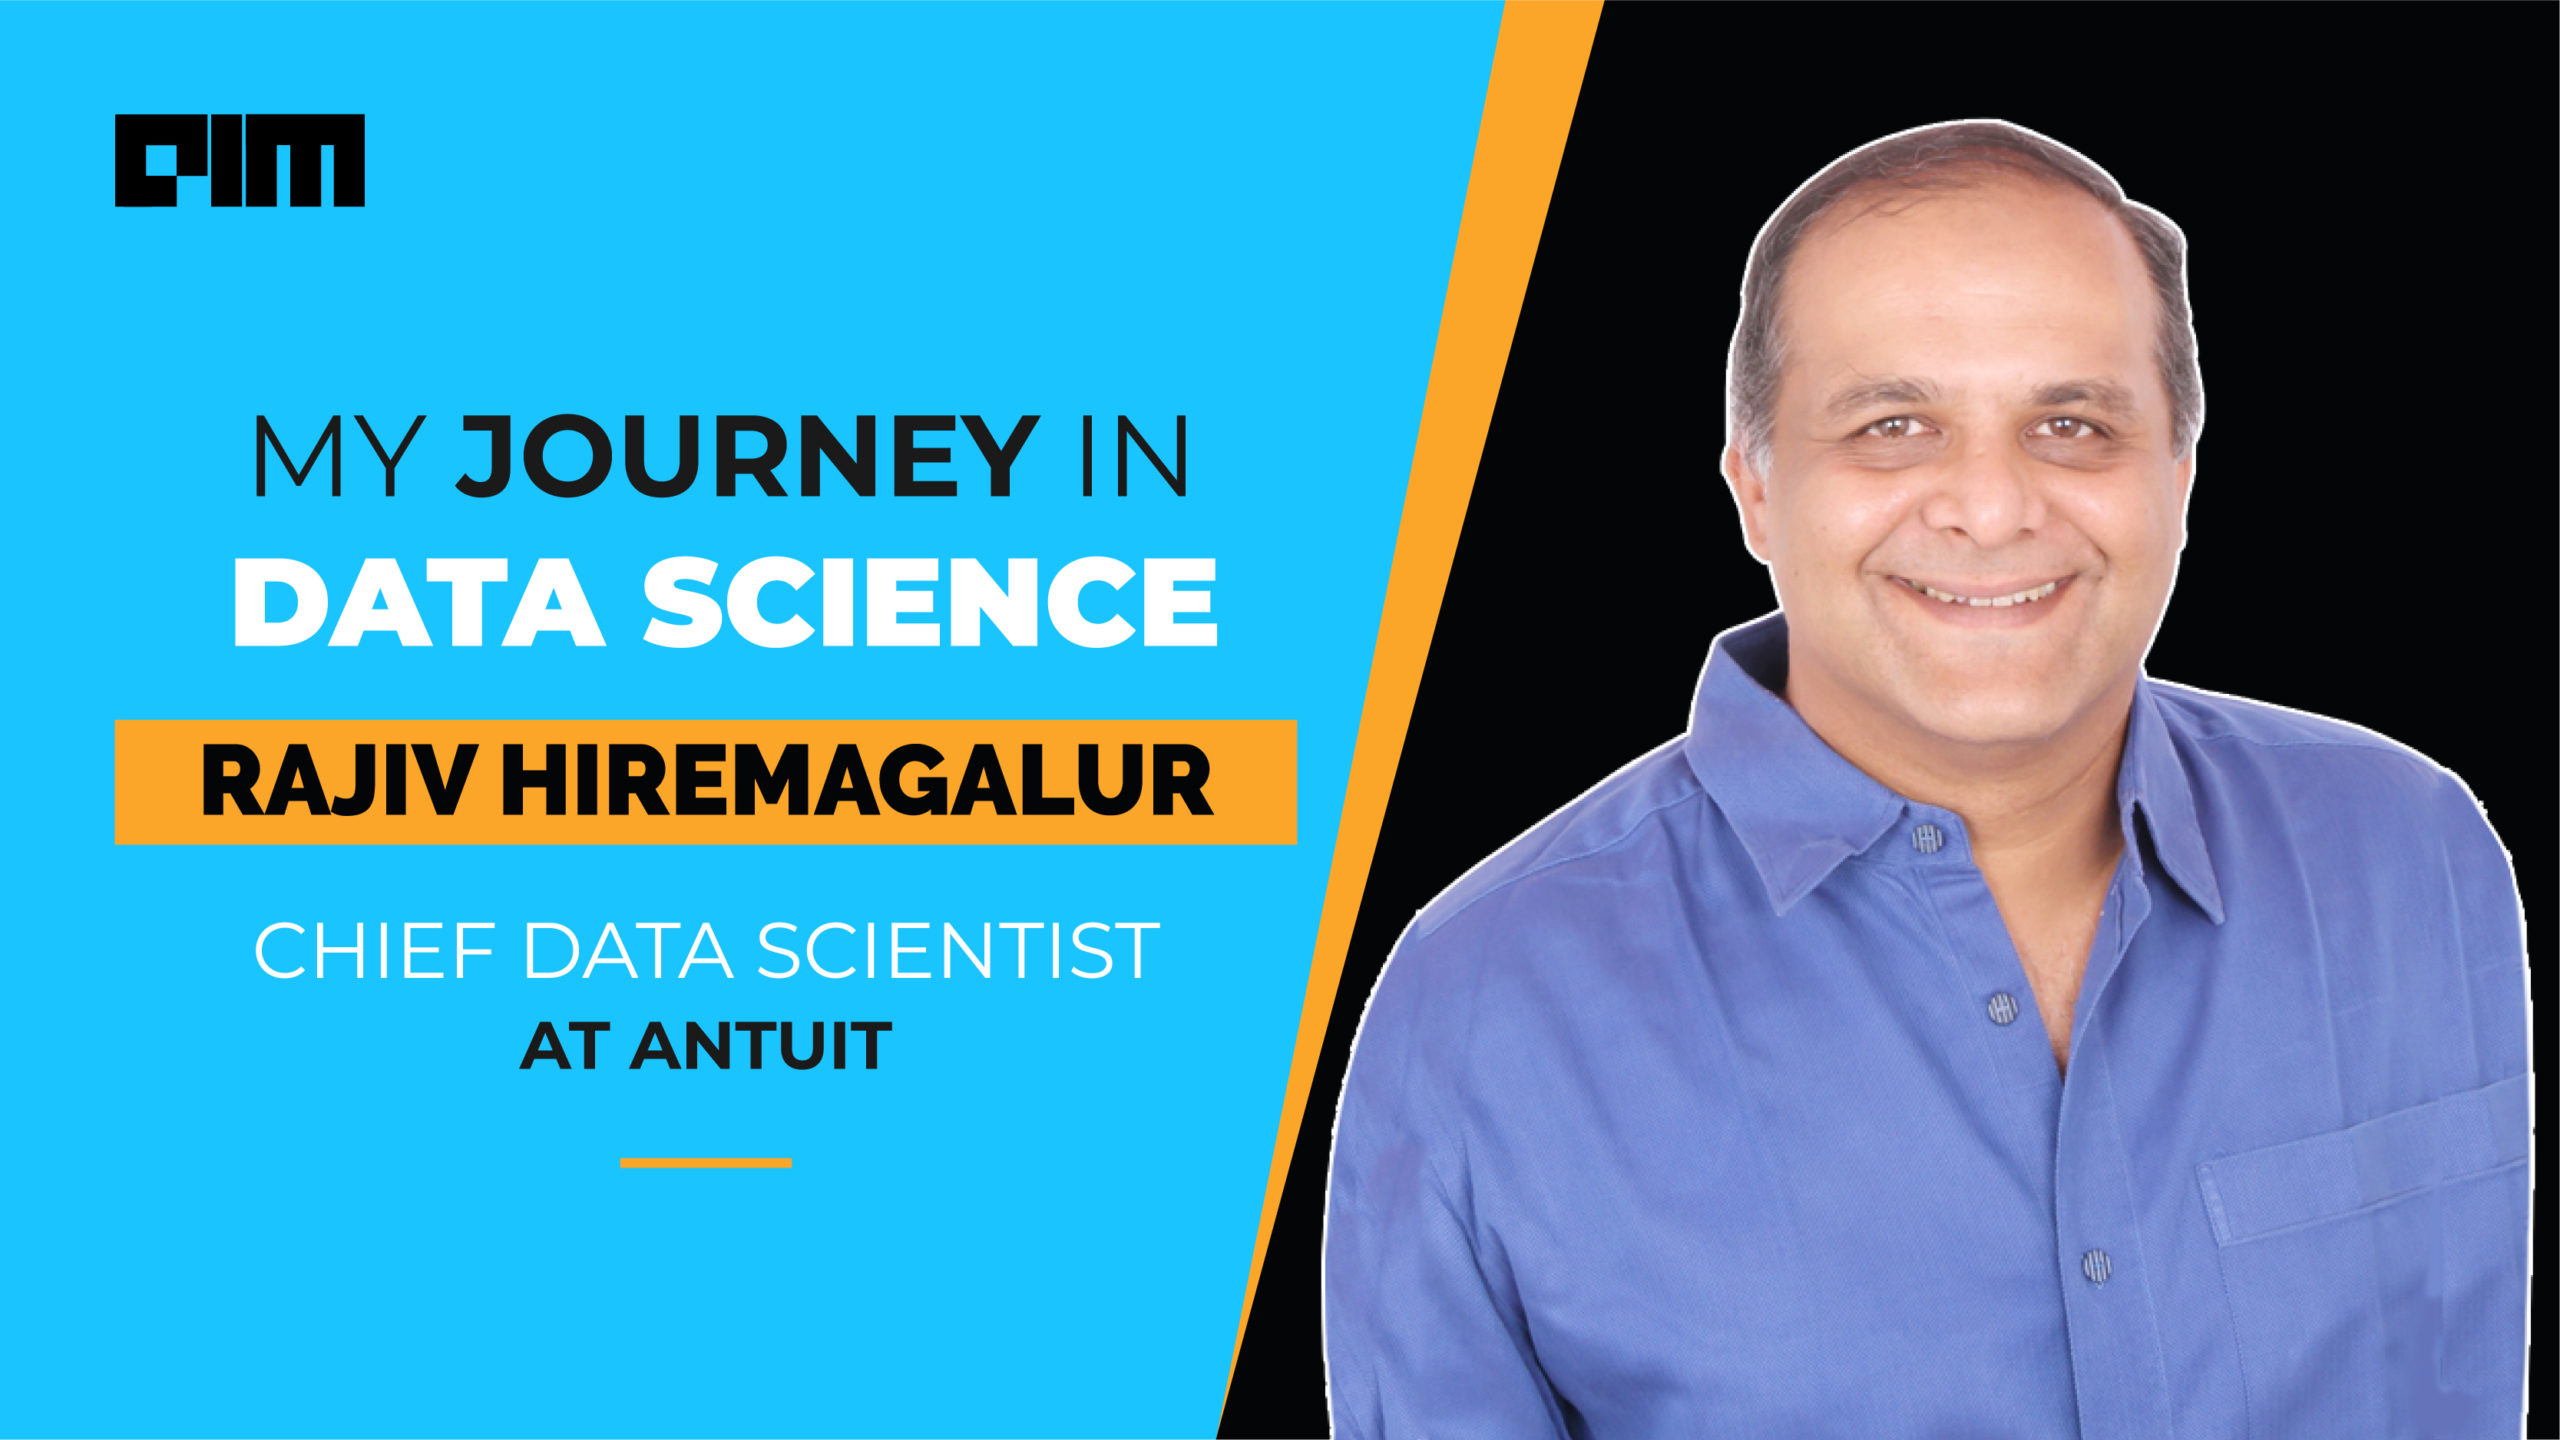 Hiremagalur Journey In Data Science